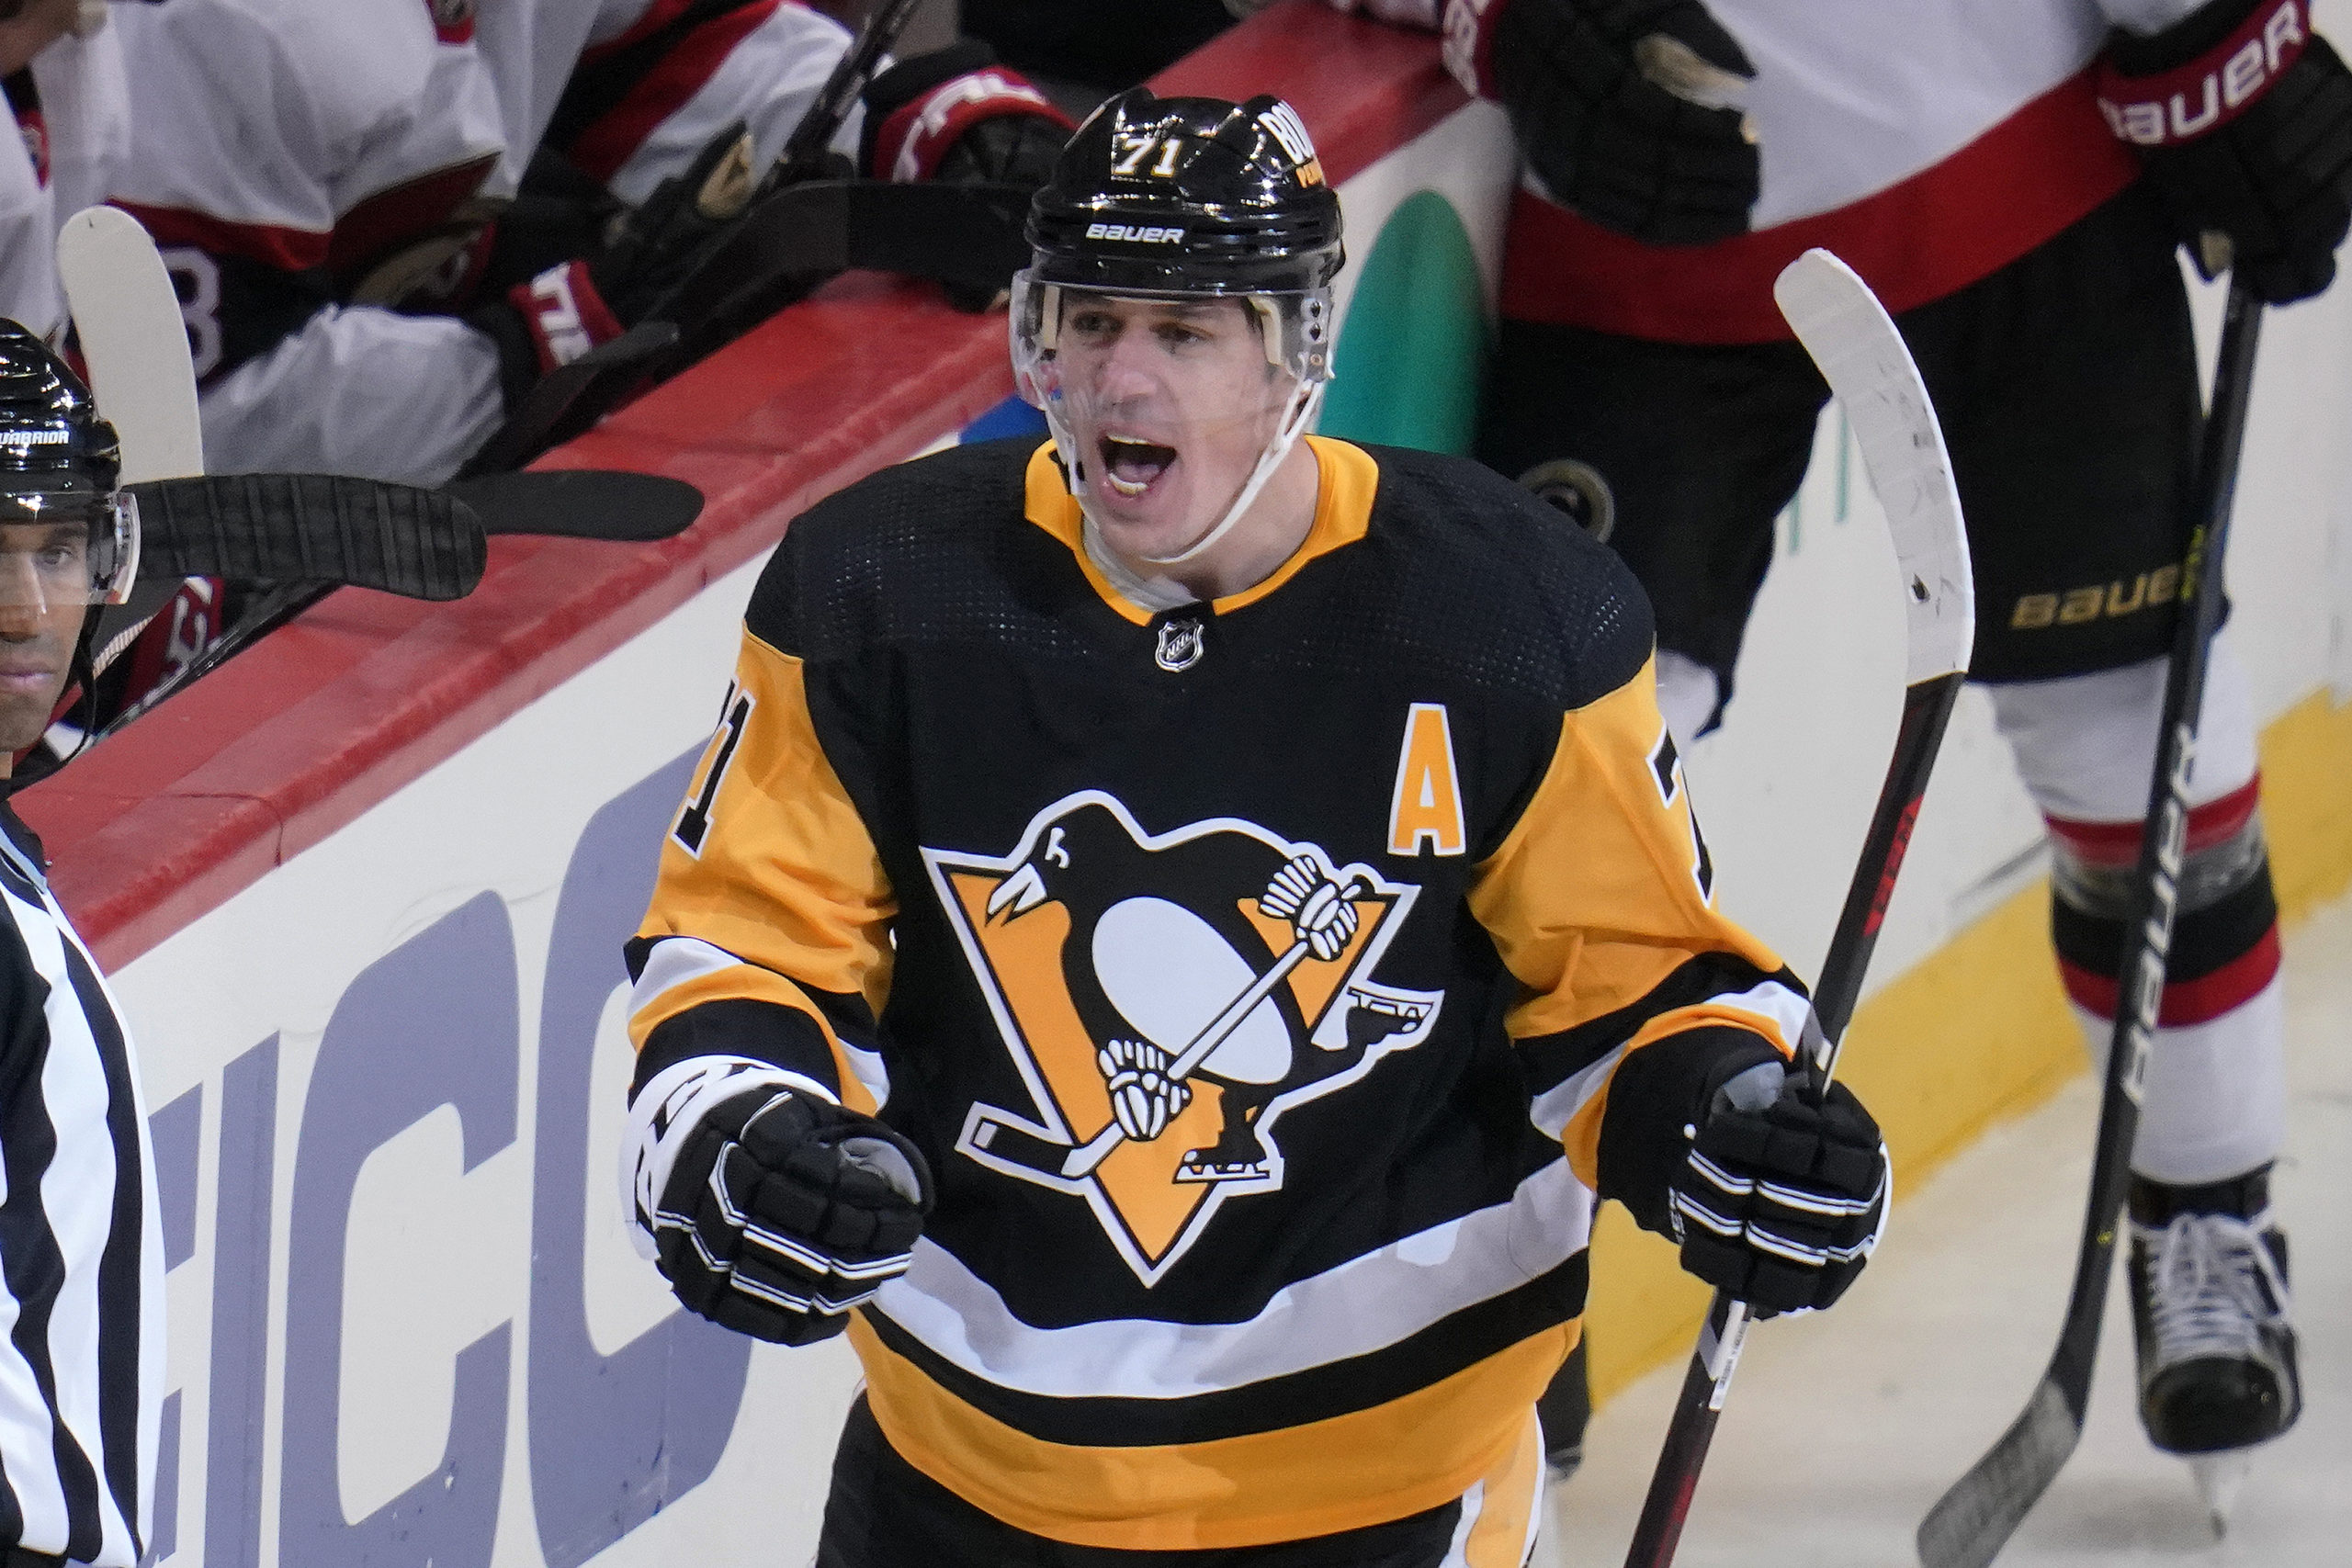 Could the Capitals go for Evgeni Malkin?